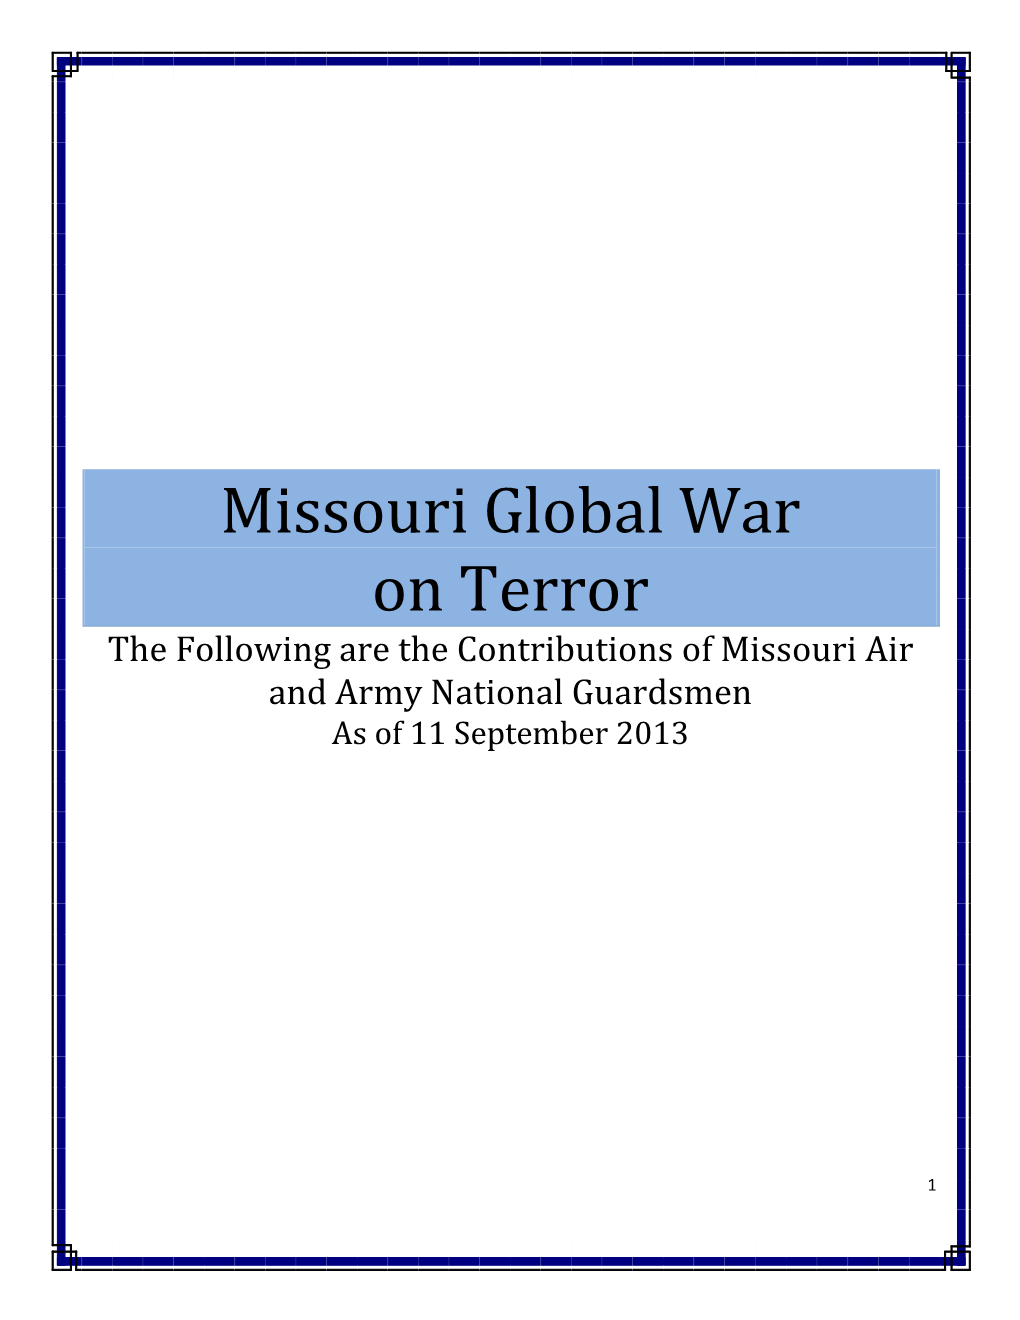 Missouri Global War on Terror the Following Are the Contributions of Missouri Air and Army National Guardsmen As of 11 September 2013